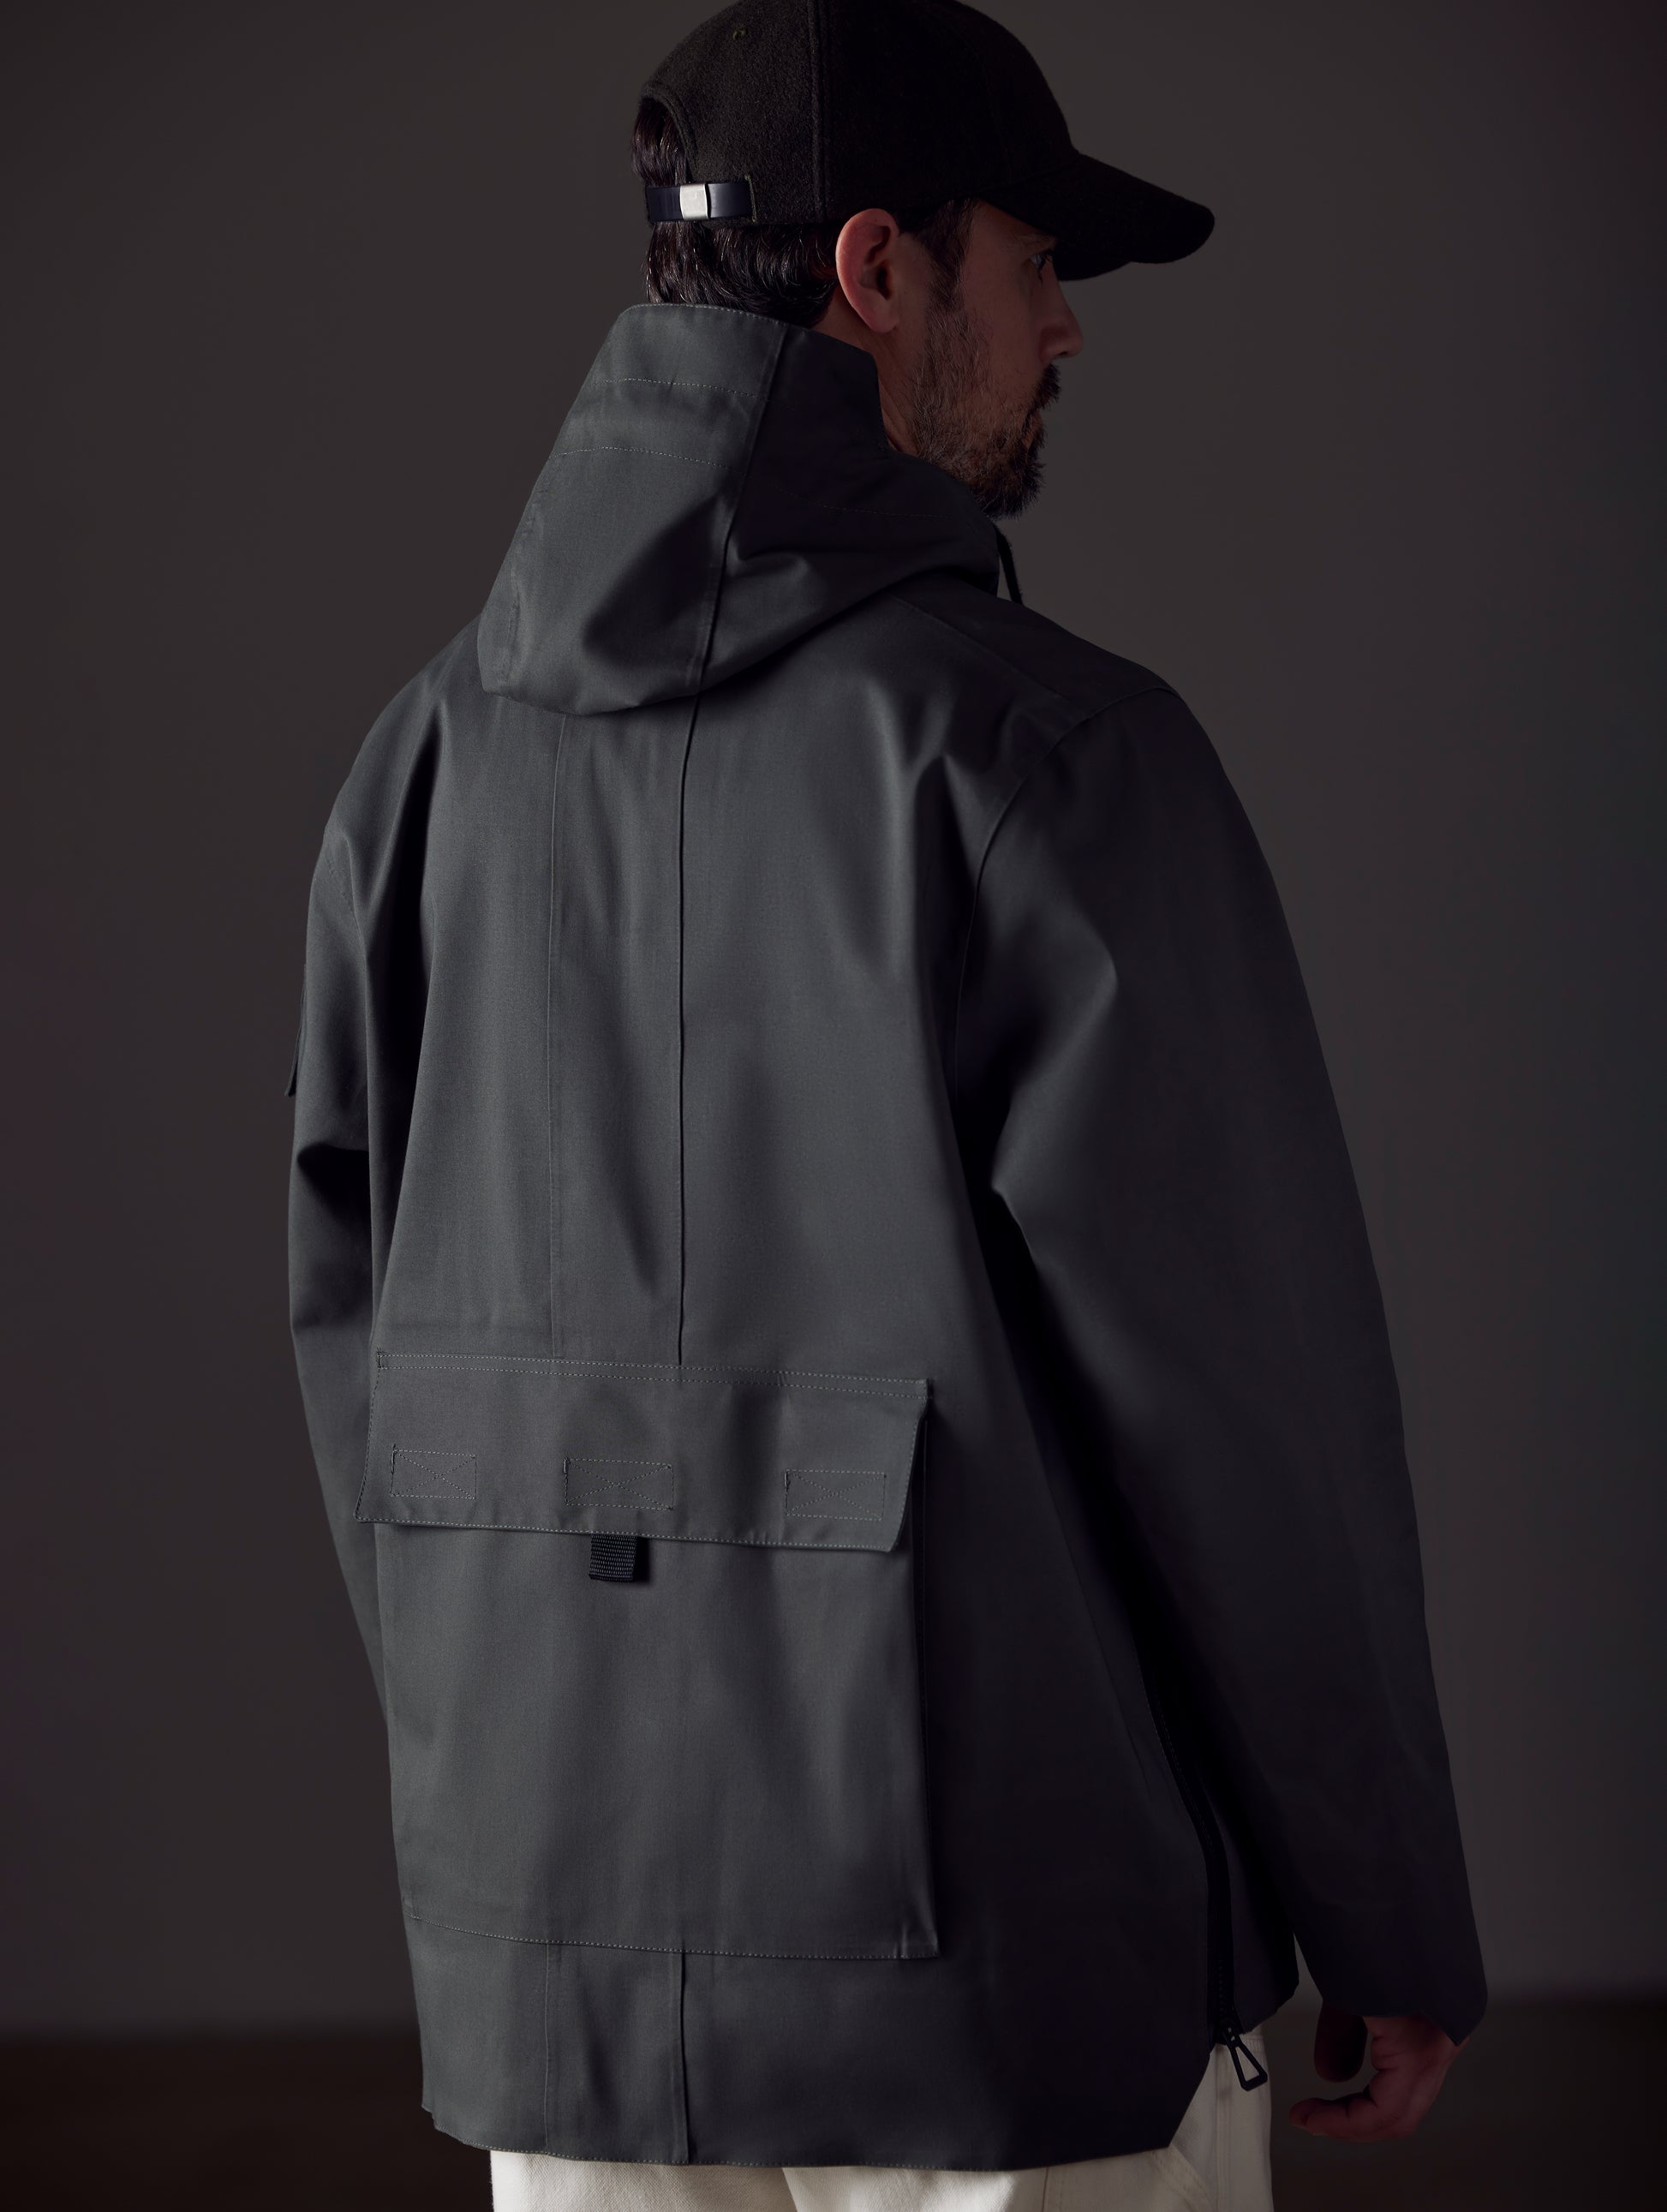 Side view of man wearing dark green anorak from AETHER Apparel